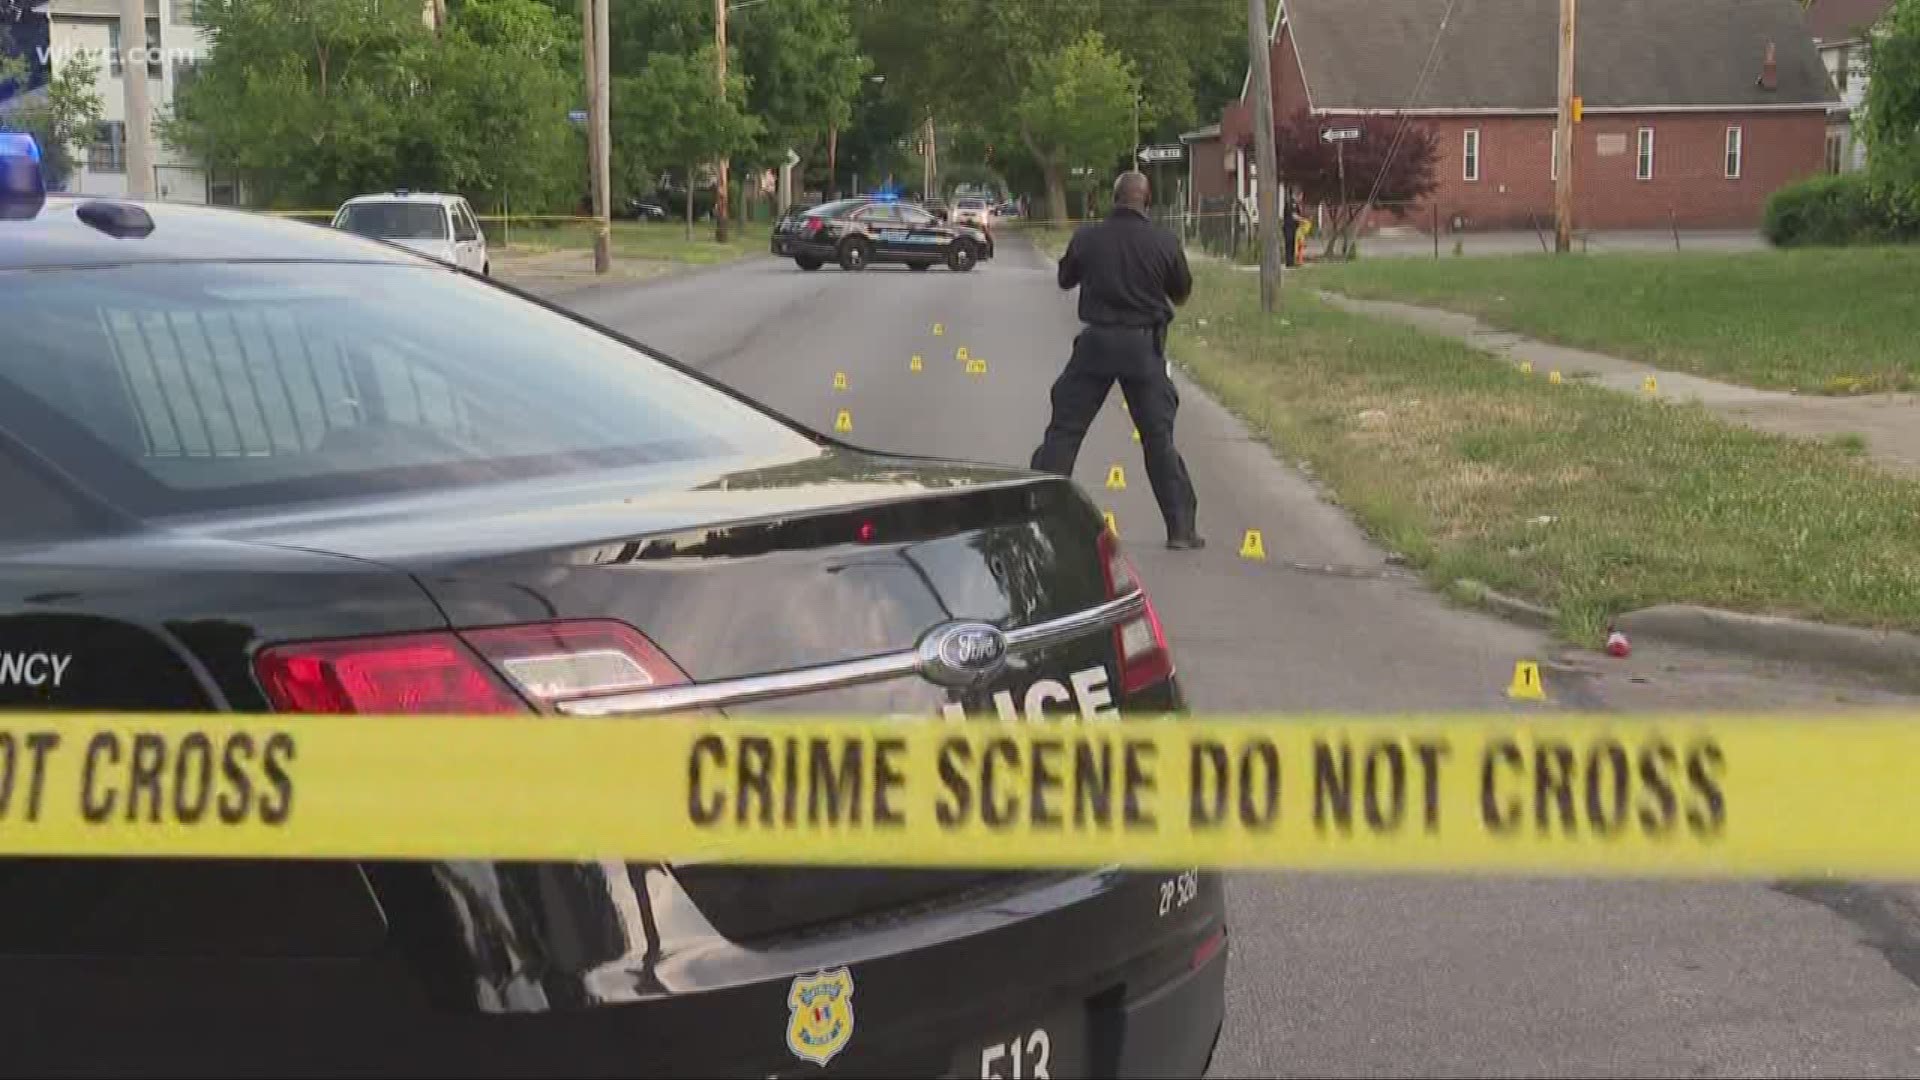 Homicides in Cleveland continue to rise after 94yearold woman killed